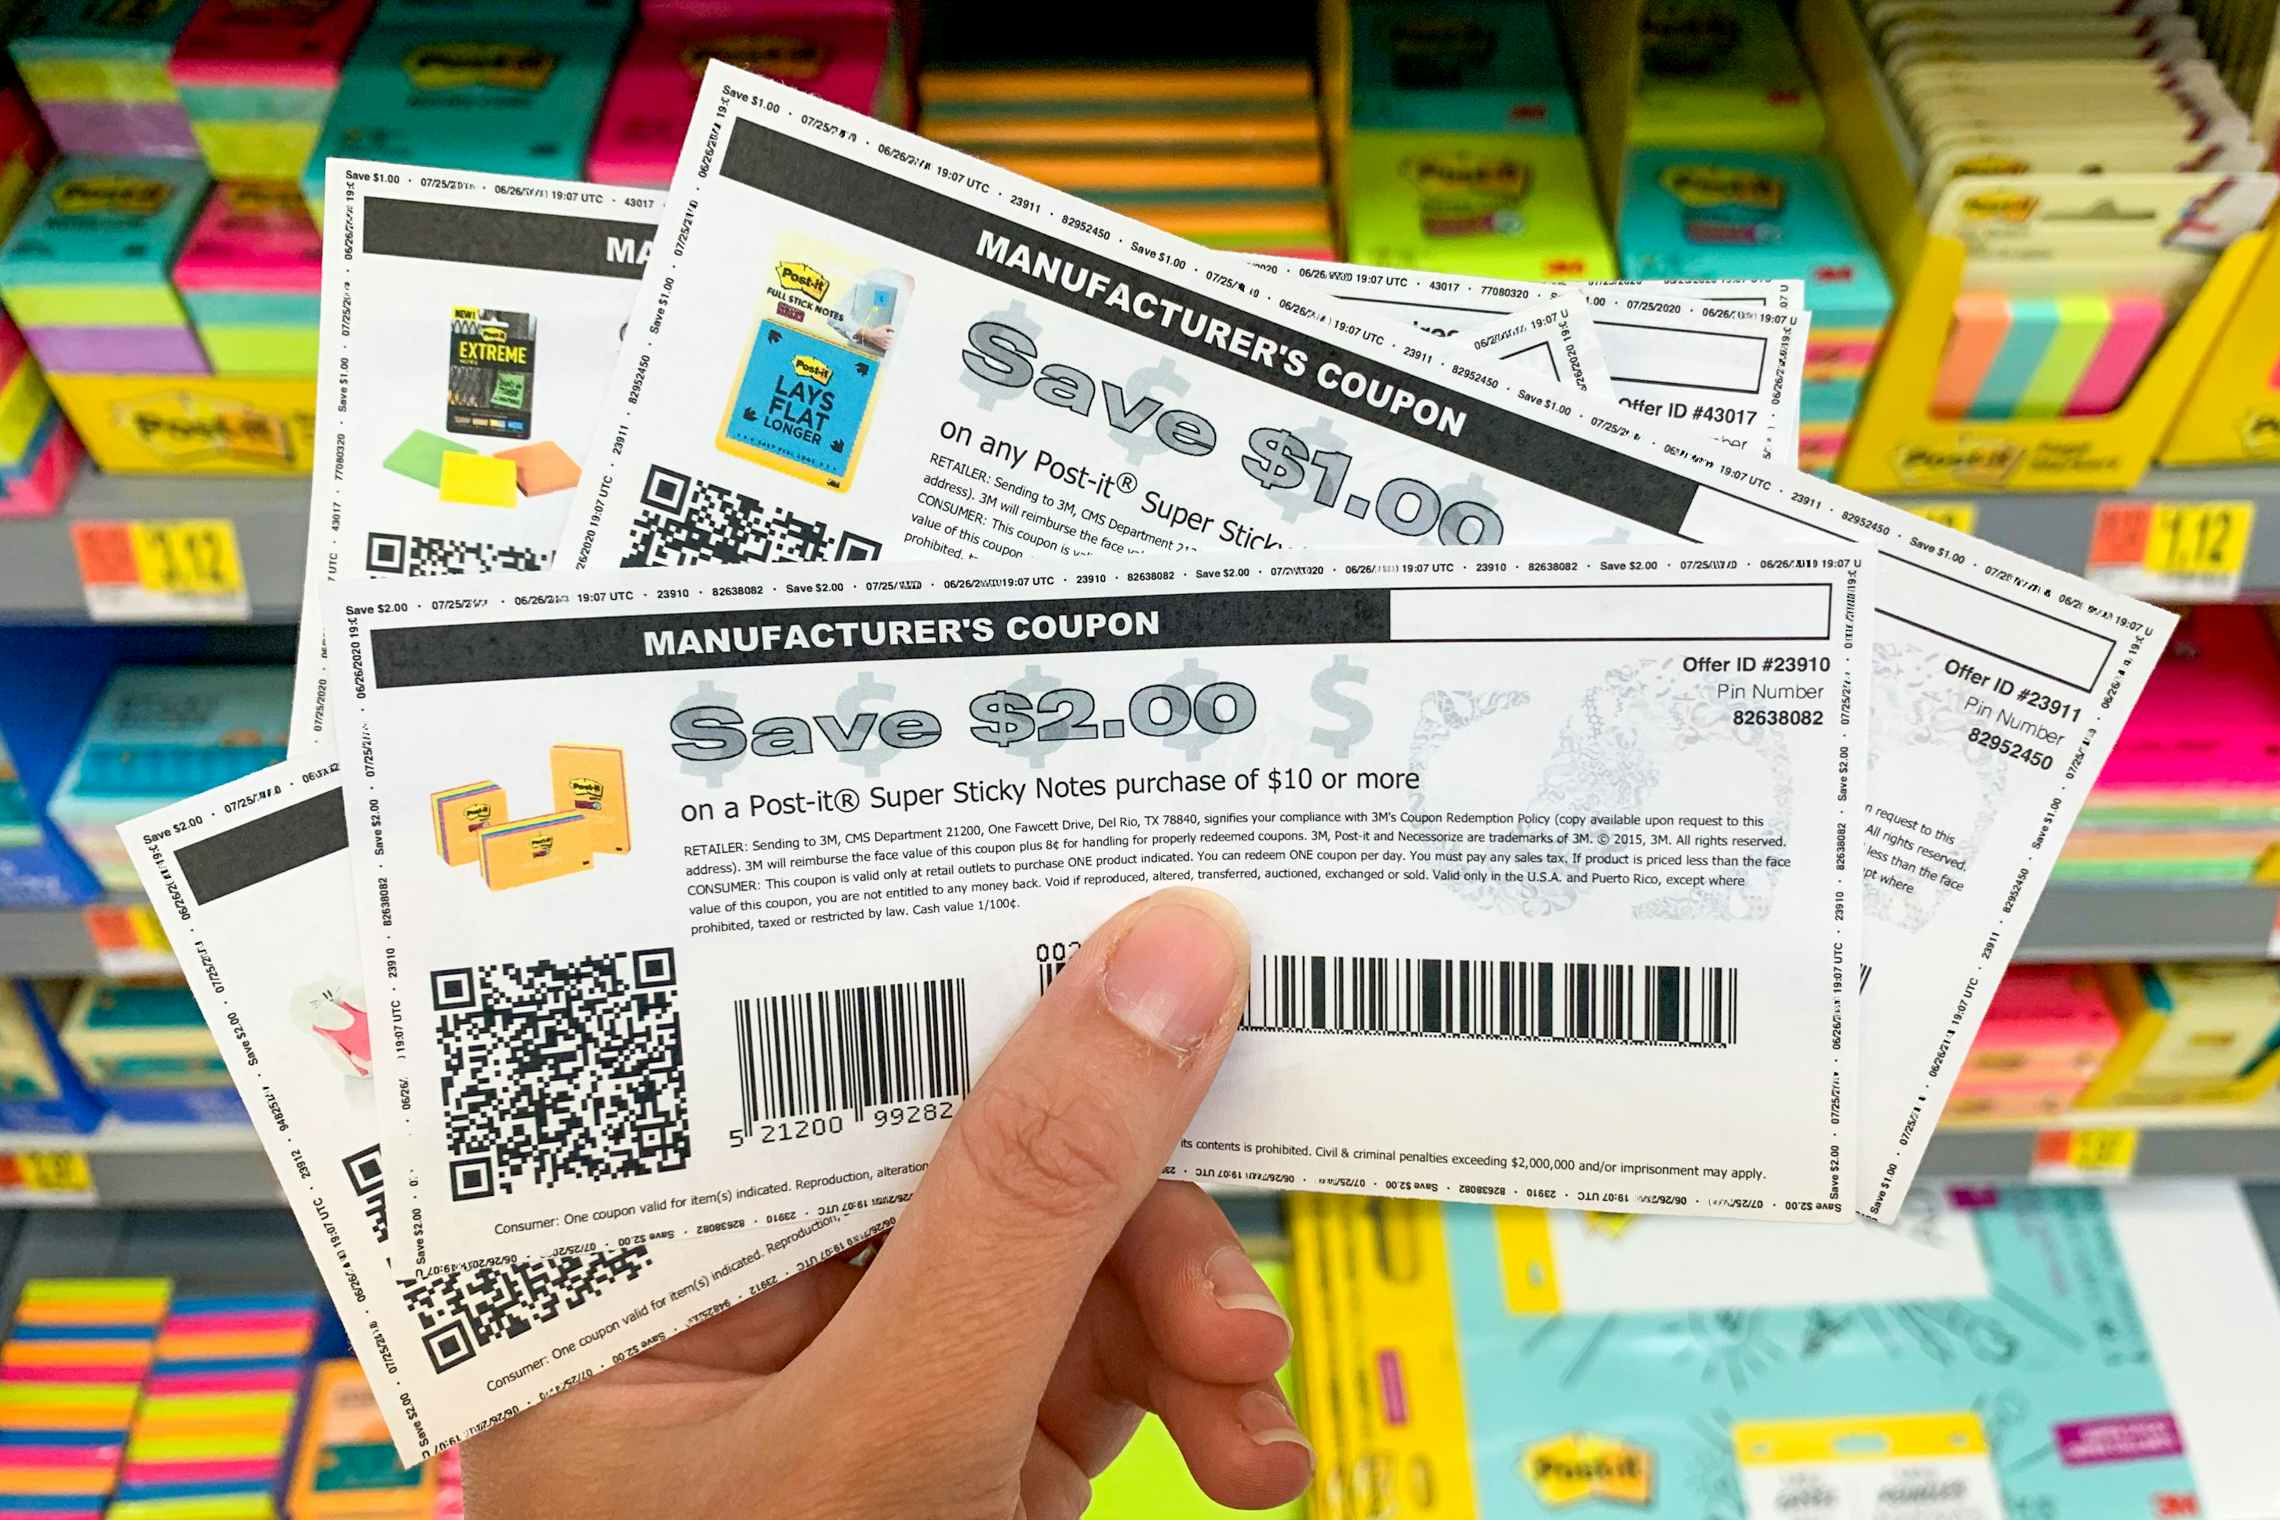 A person's hand holding some manufacturer's coupons for Post-it products in front of a shelf filled with post-it products.